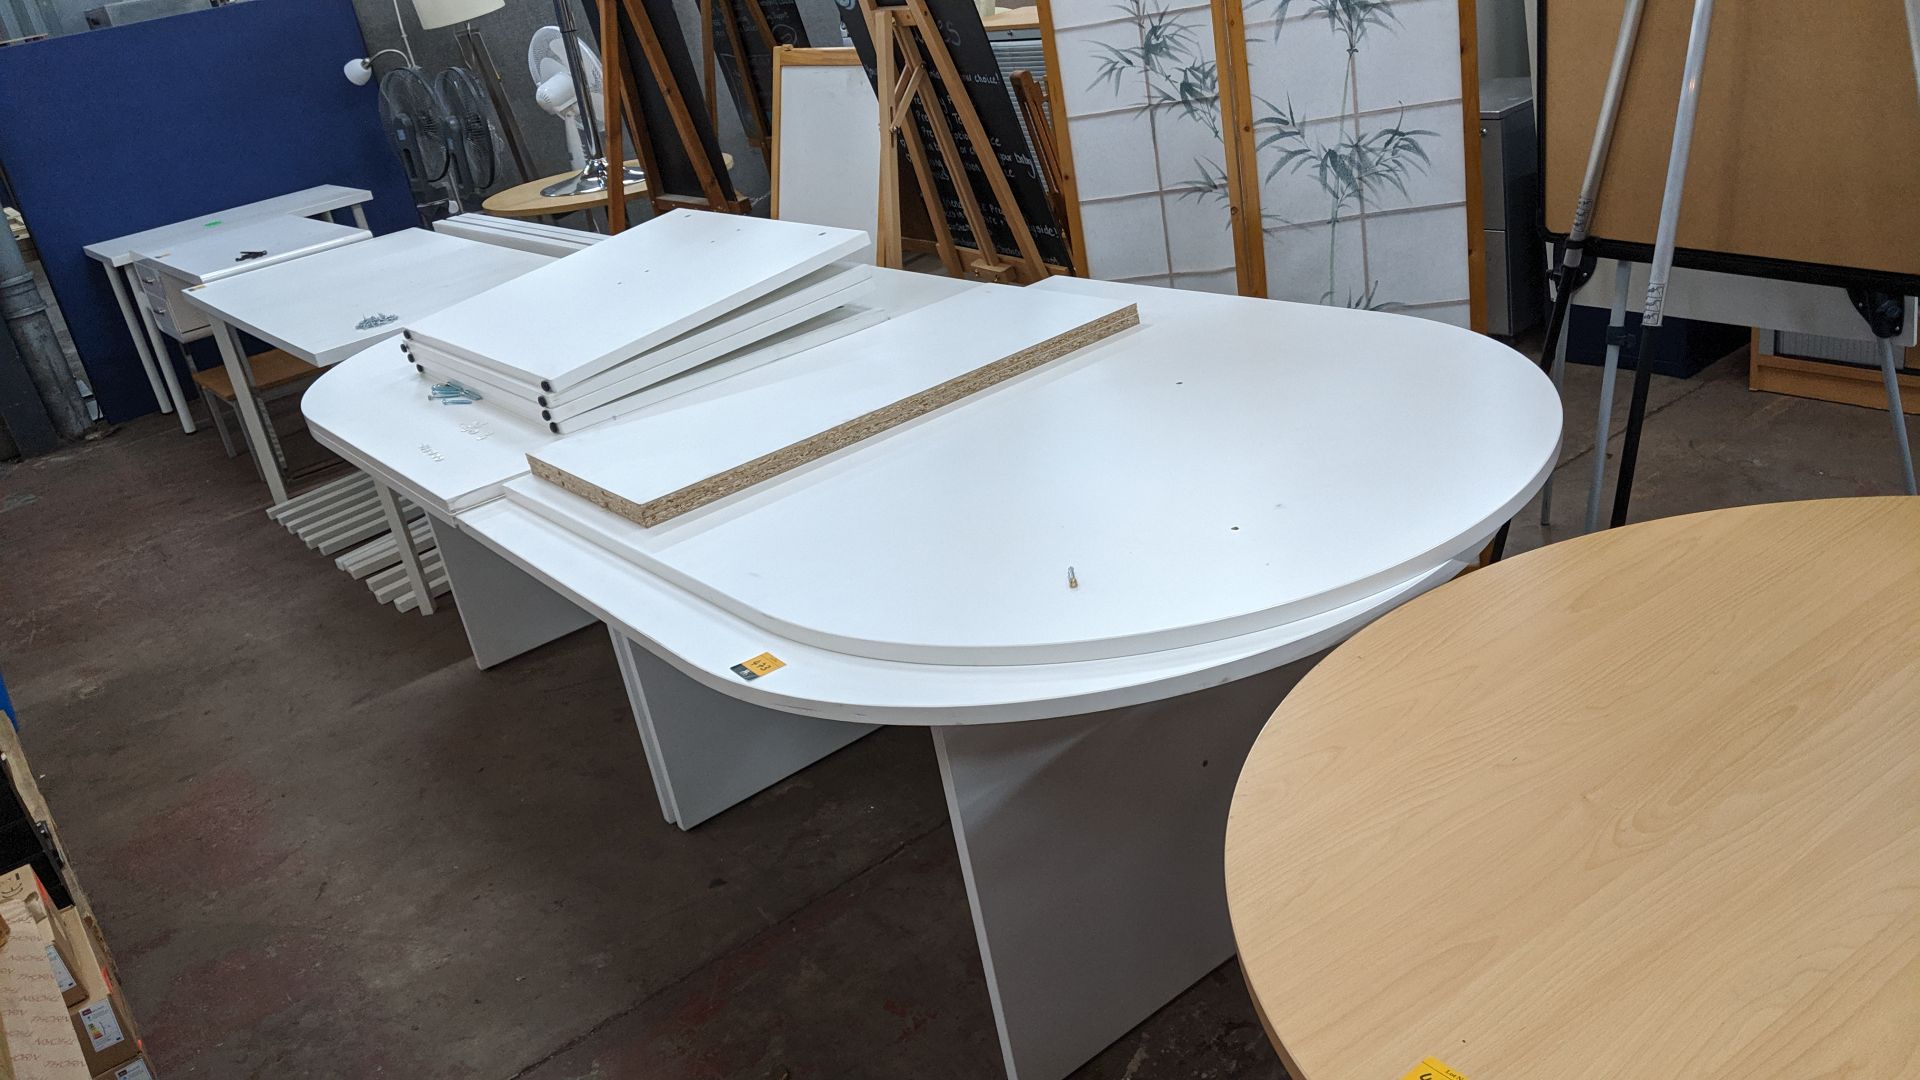 Pair of large oval meeting tables, one assembled & one unassembled, max. dimensions of complete